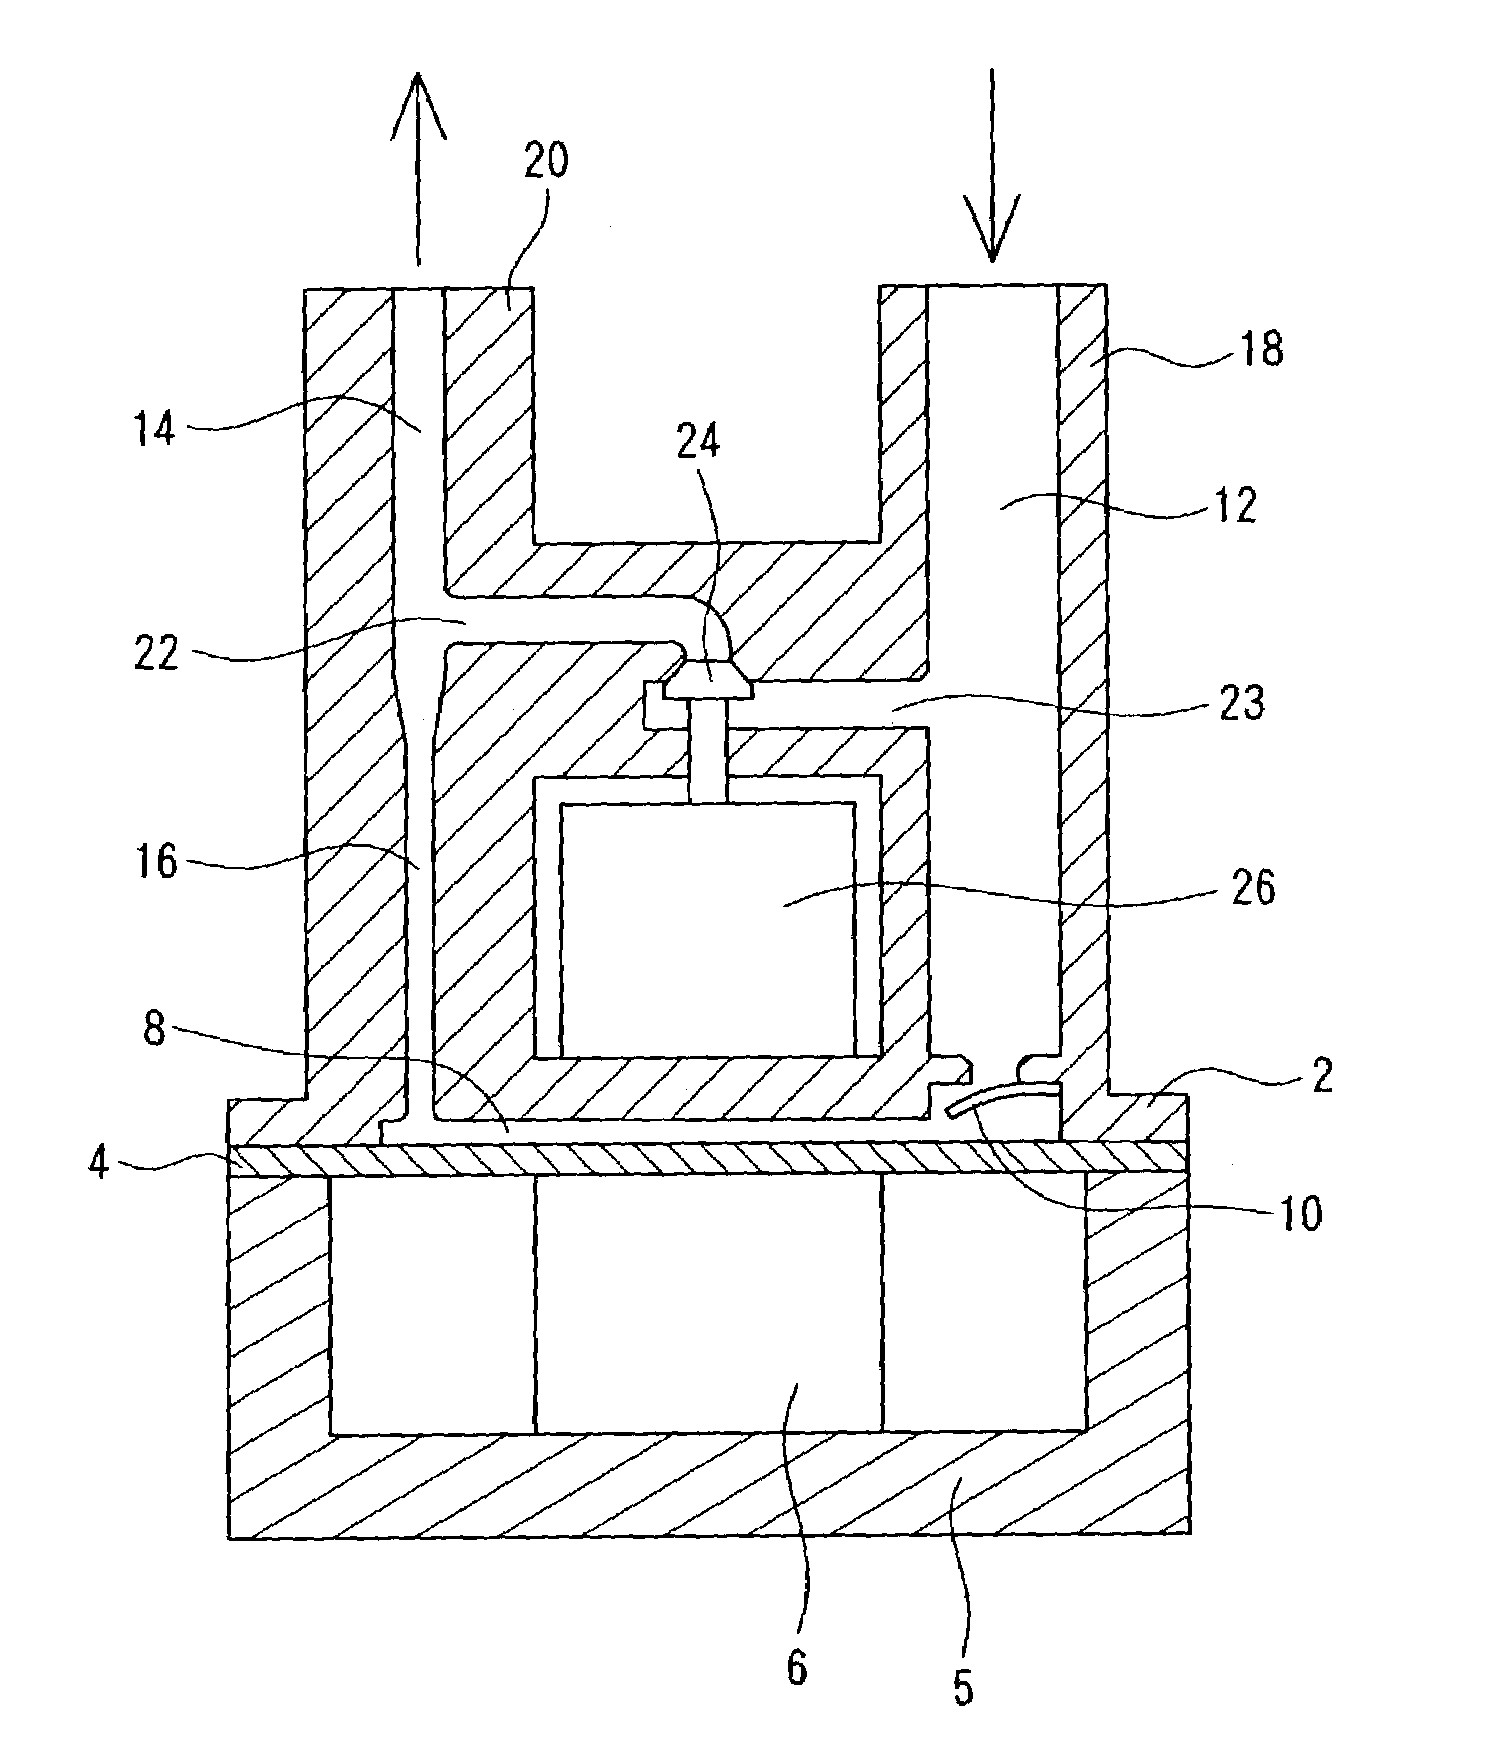 Positive displacement pump with a combined inertance value of the inlet flow path smaller than that of the outlet flow path